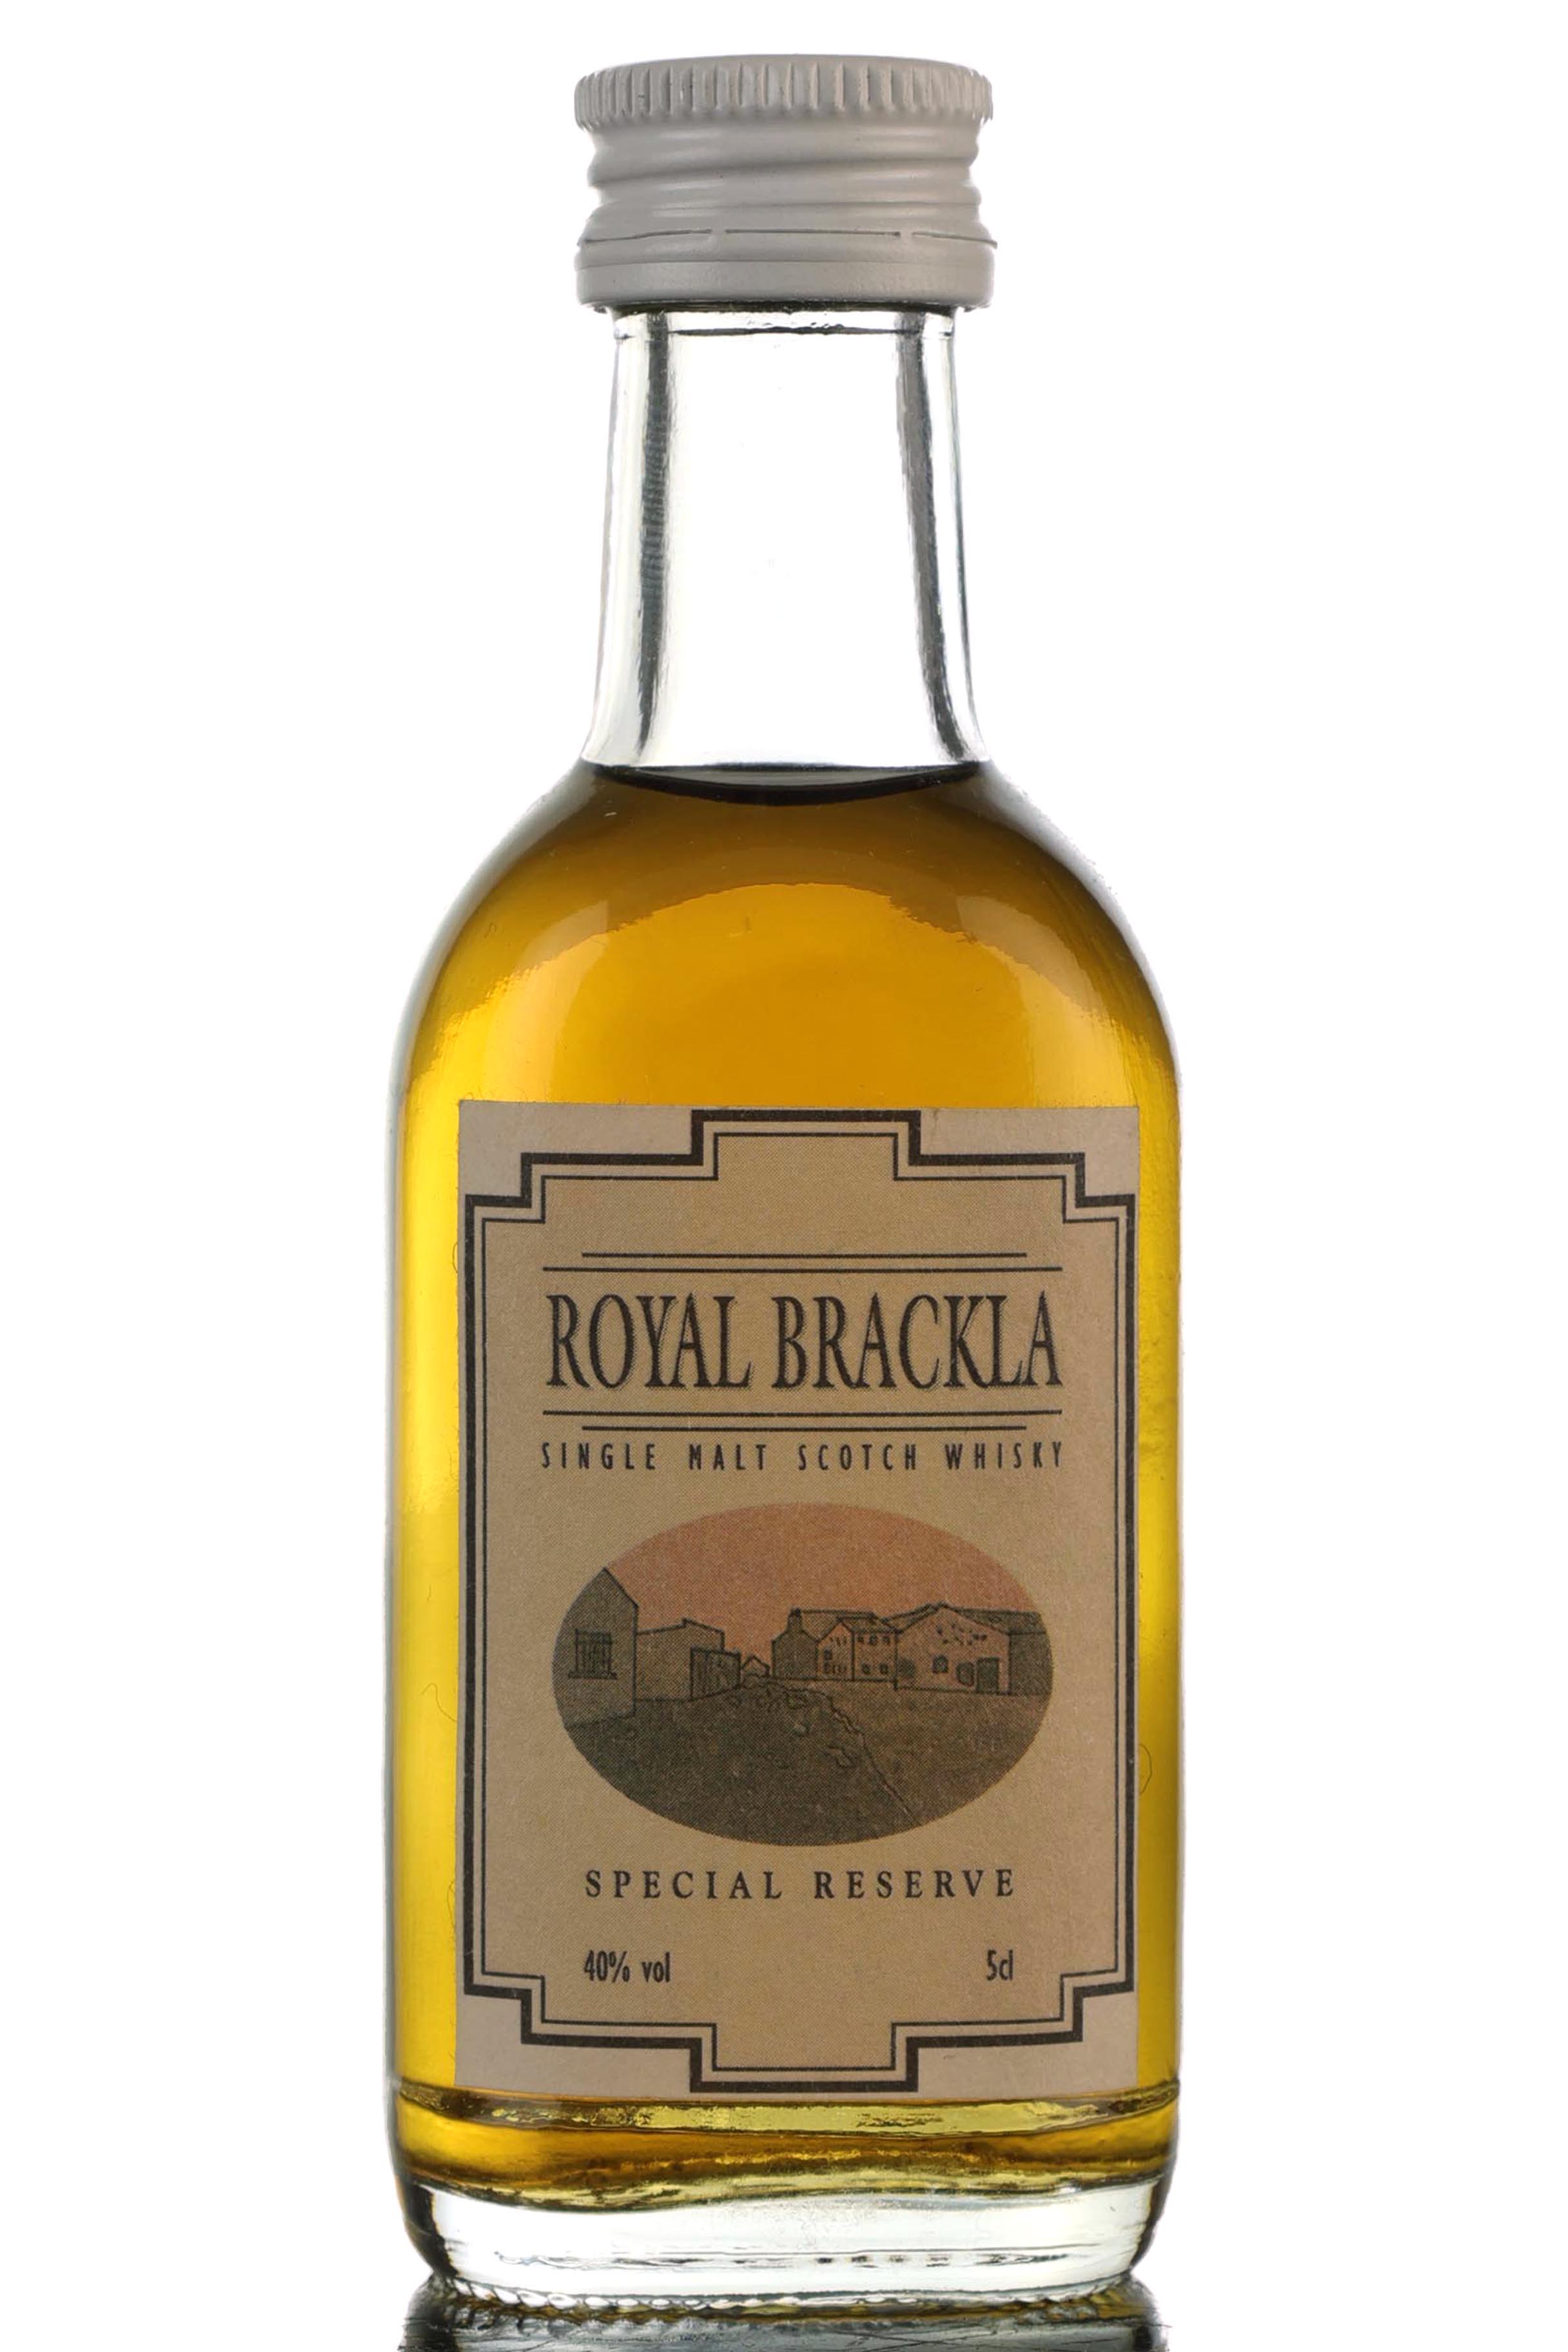 Royal Brackla 1924 - 60 Year Old - Special Reserve - Miniature